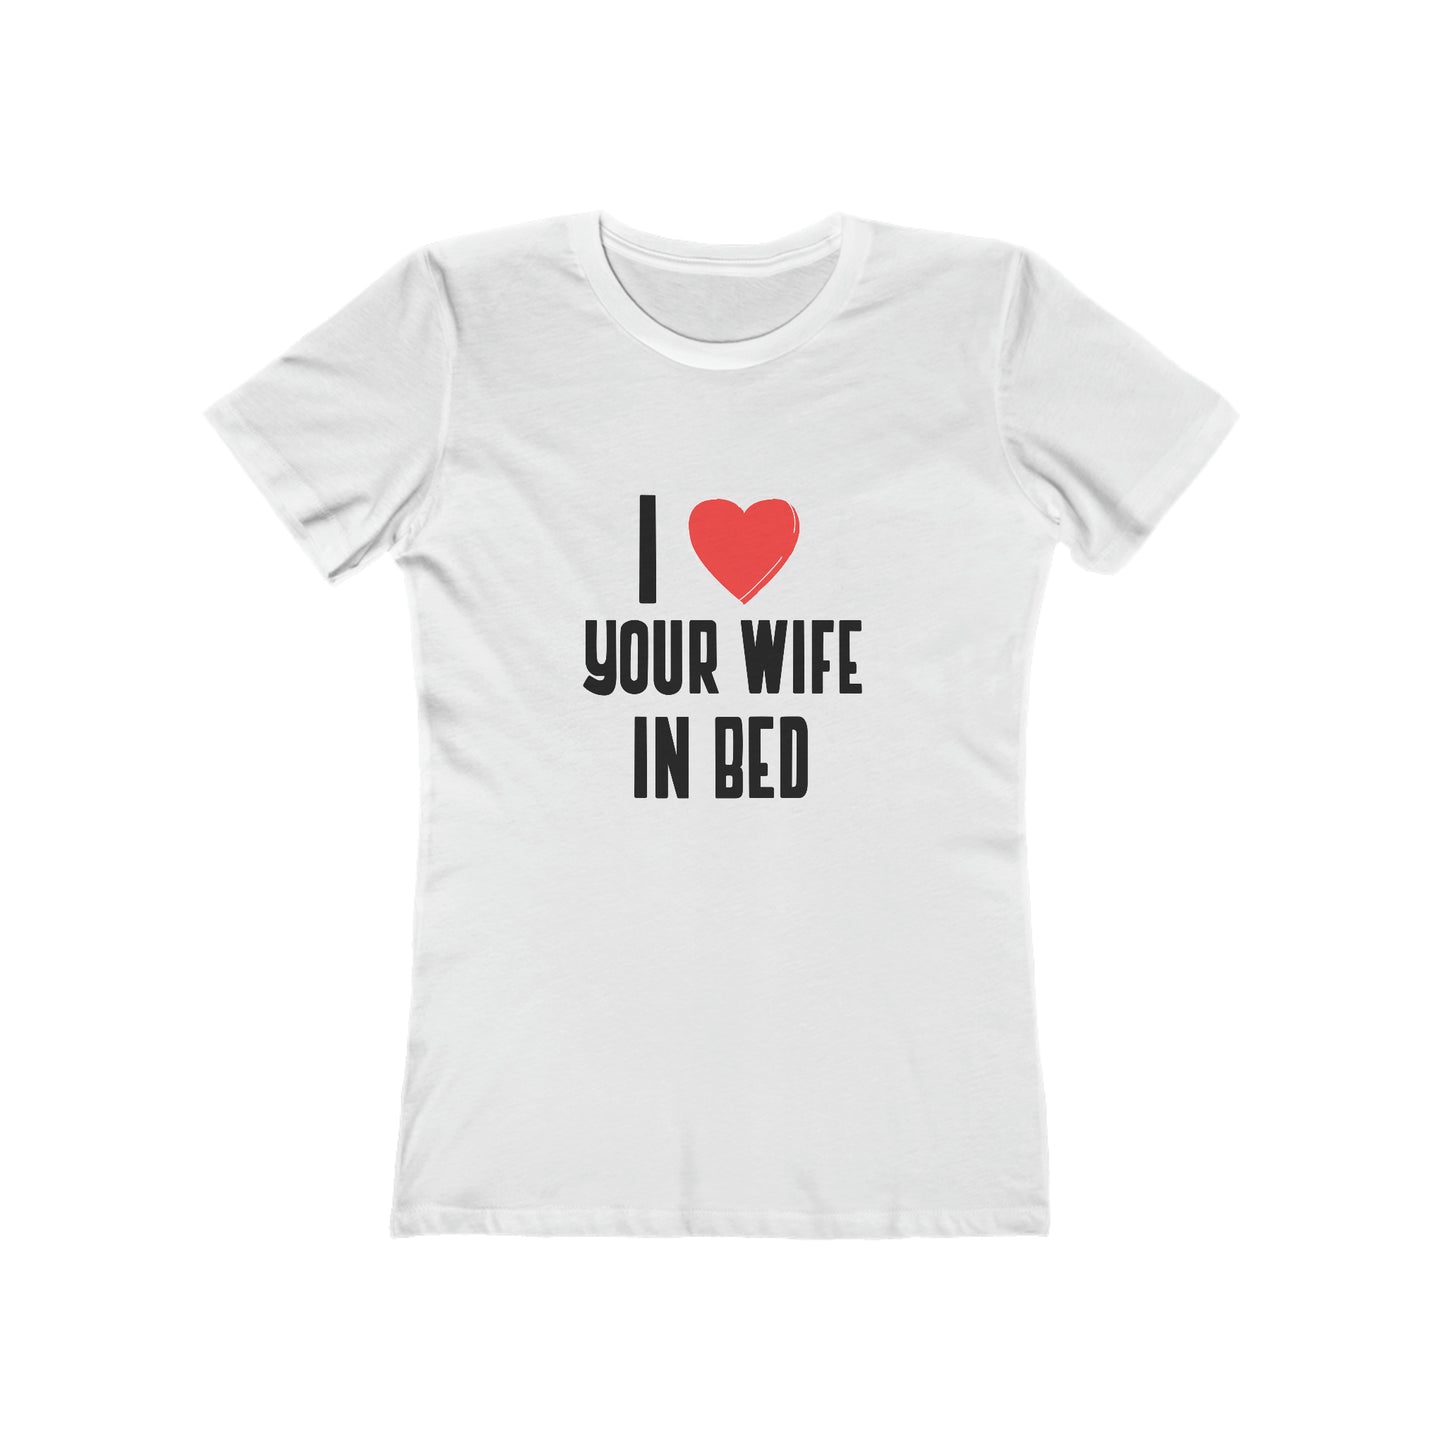 I Heart Your Wife In Bed - Women's T-shirt